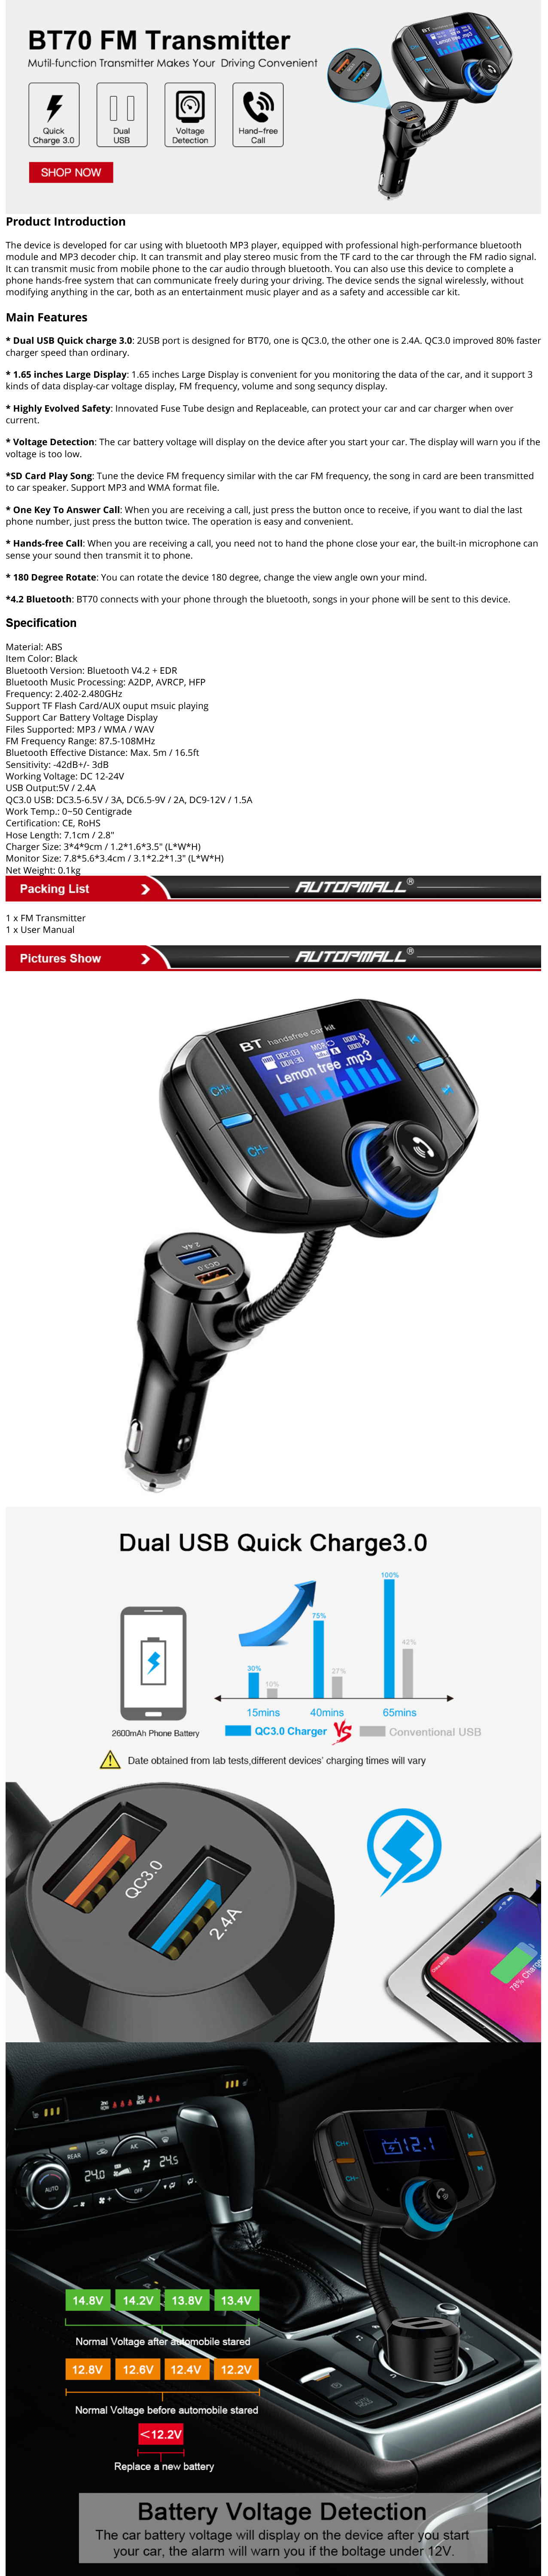 Bluetooth Fm Transmitter for Car,Wireless Bluetooth FM Radio Transmitter  Adapter and Receiver/Car Kit with Hands Free Calling,Dual USB Charging Car  Charger MP3 Player Support TF Card & USB Disk 